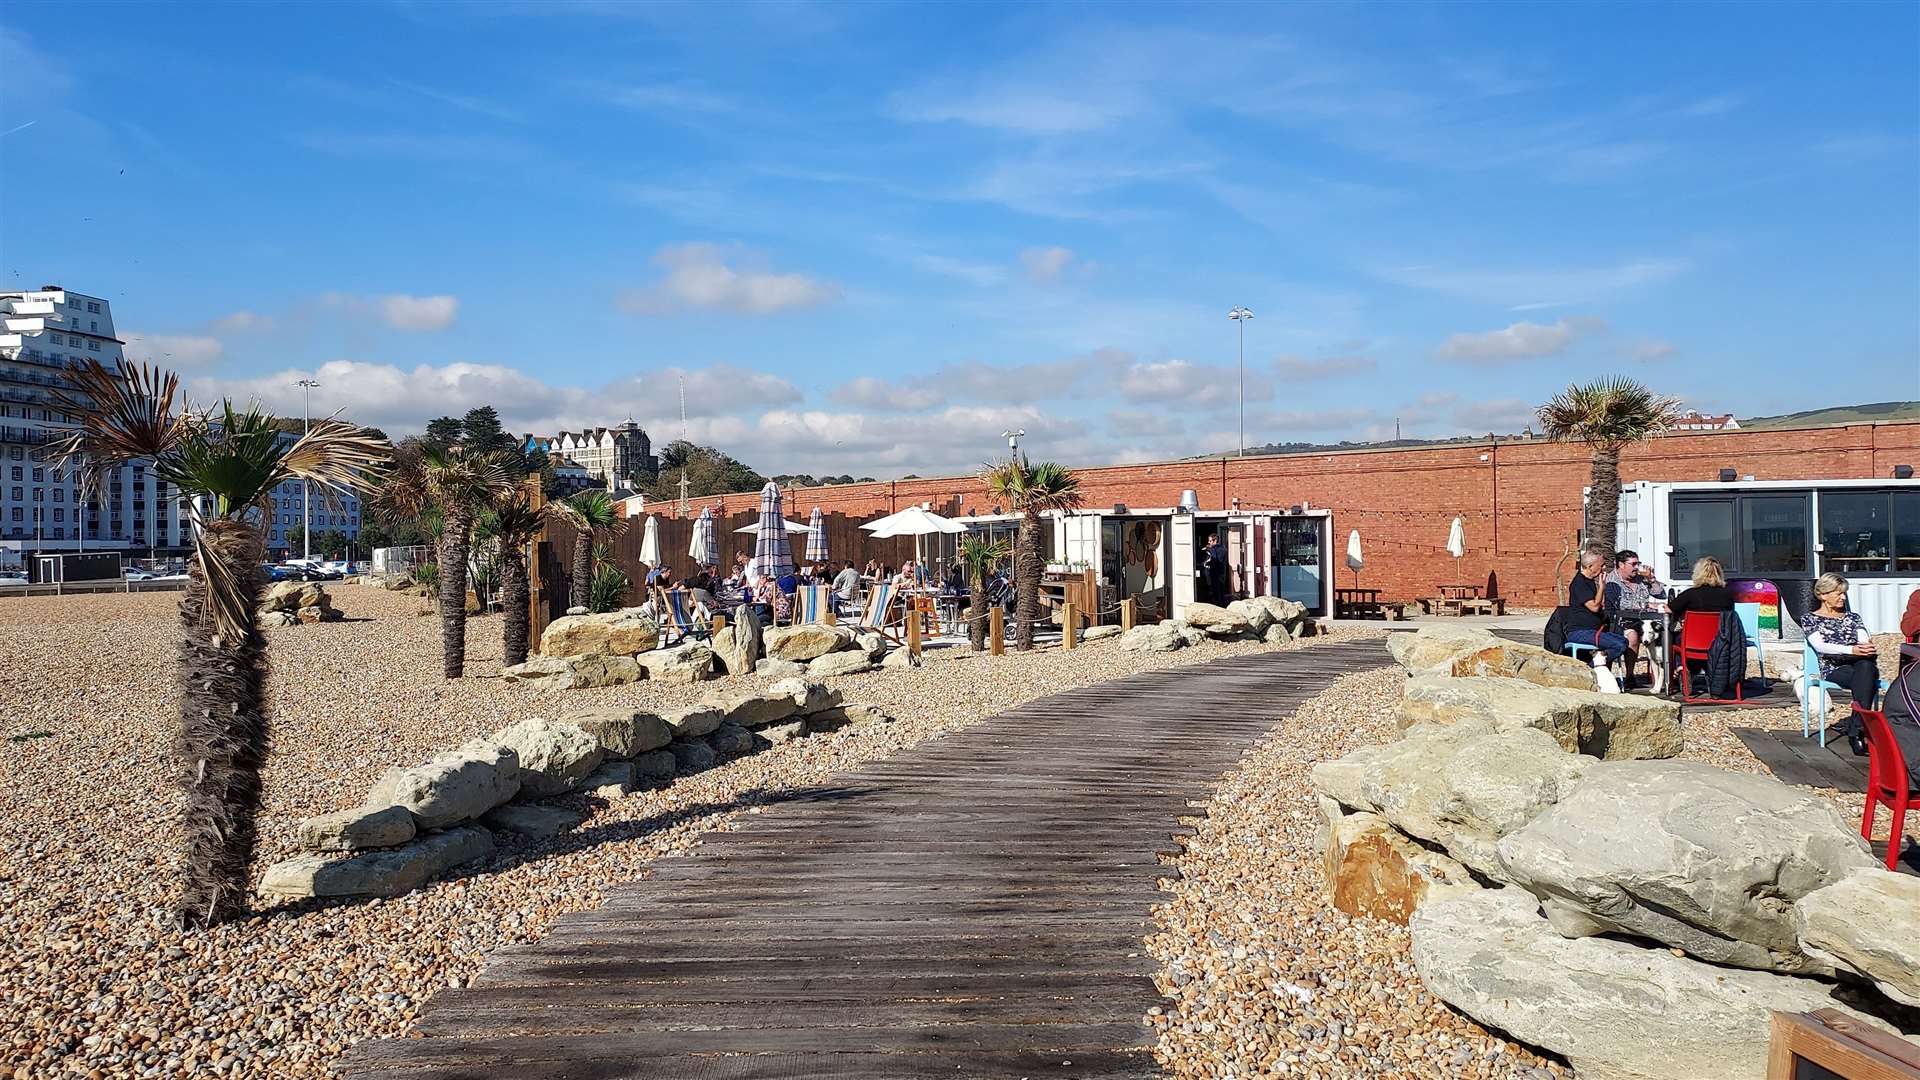 The Little Rock seafood restaurant at Beachside, next to the Harbour Arm